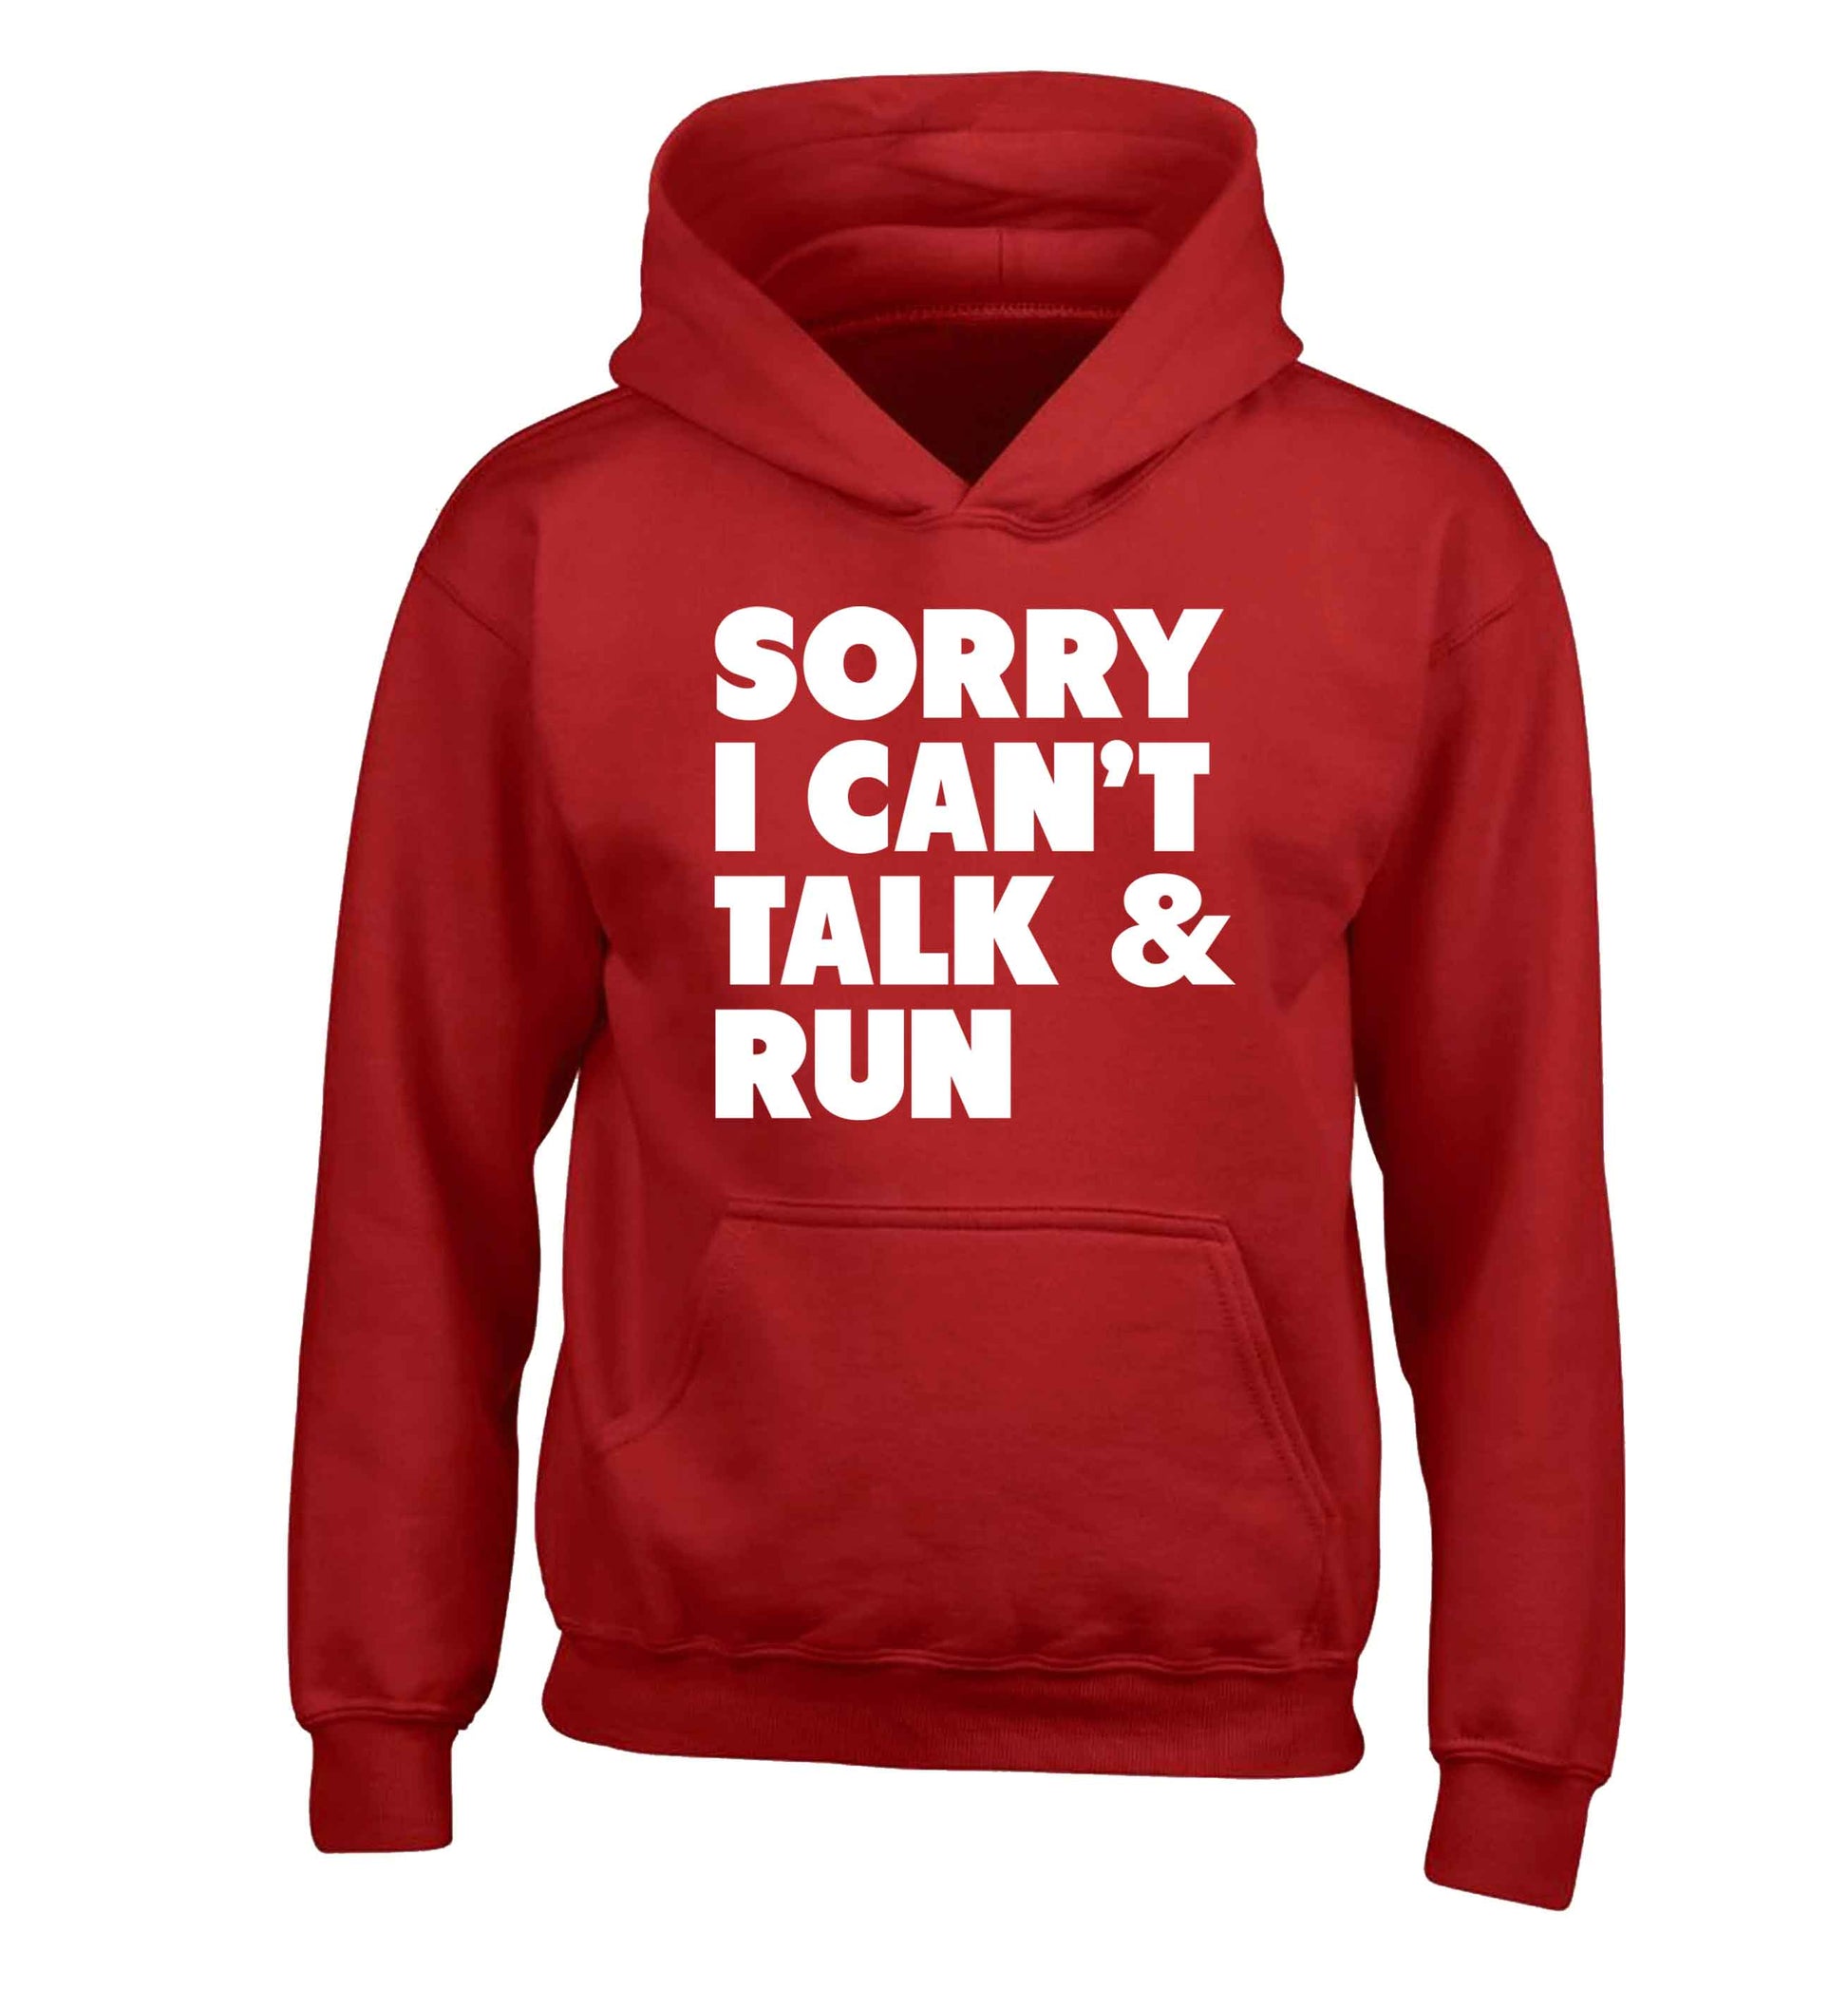 Sorry I can't talk and run children's red hoodie 12-13 Years